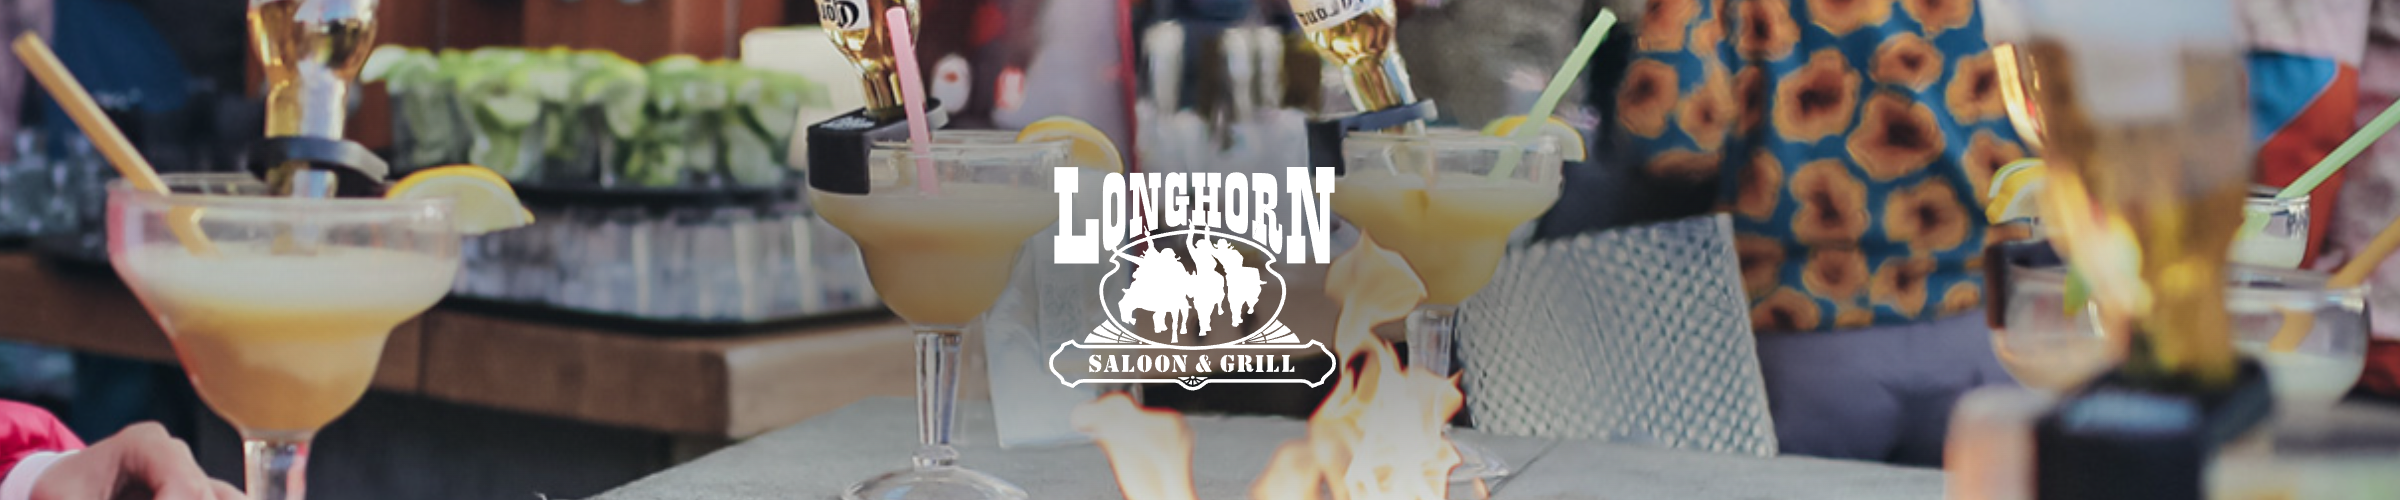 The Longhorn Saloon & Grill